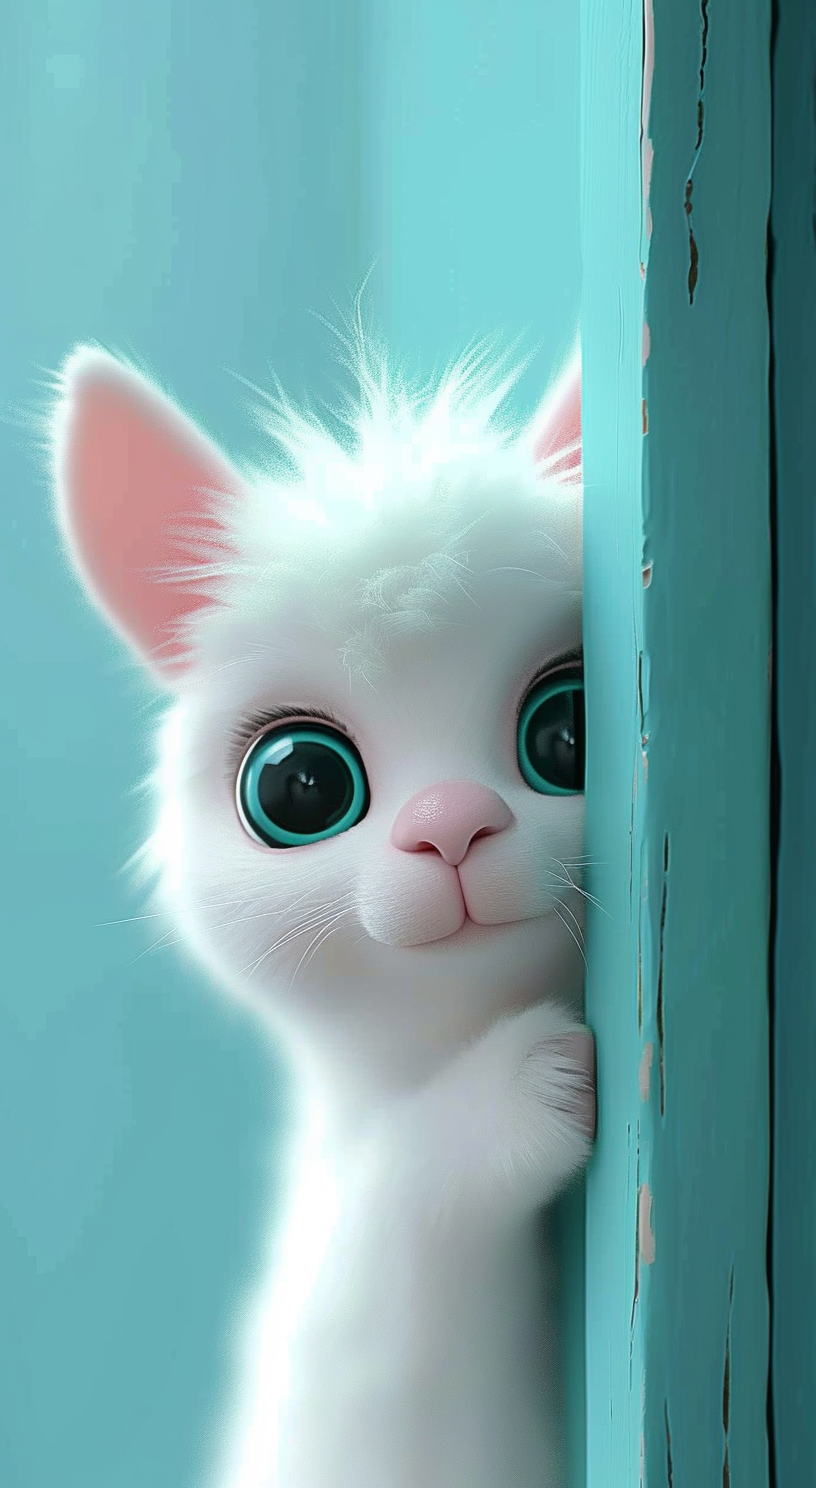 Experience the charm of our playful kitten peeking from a turquoise door.